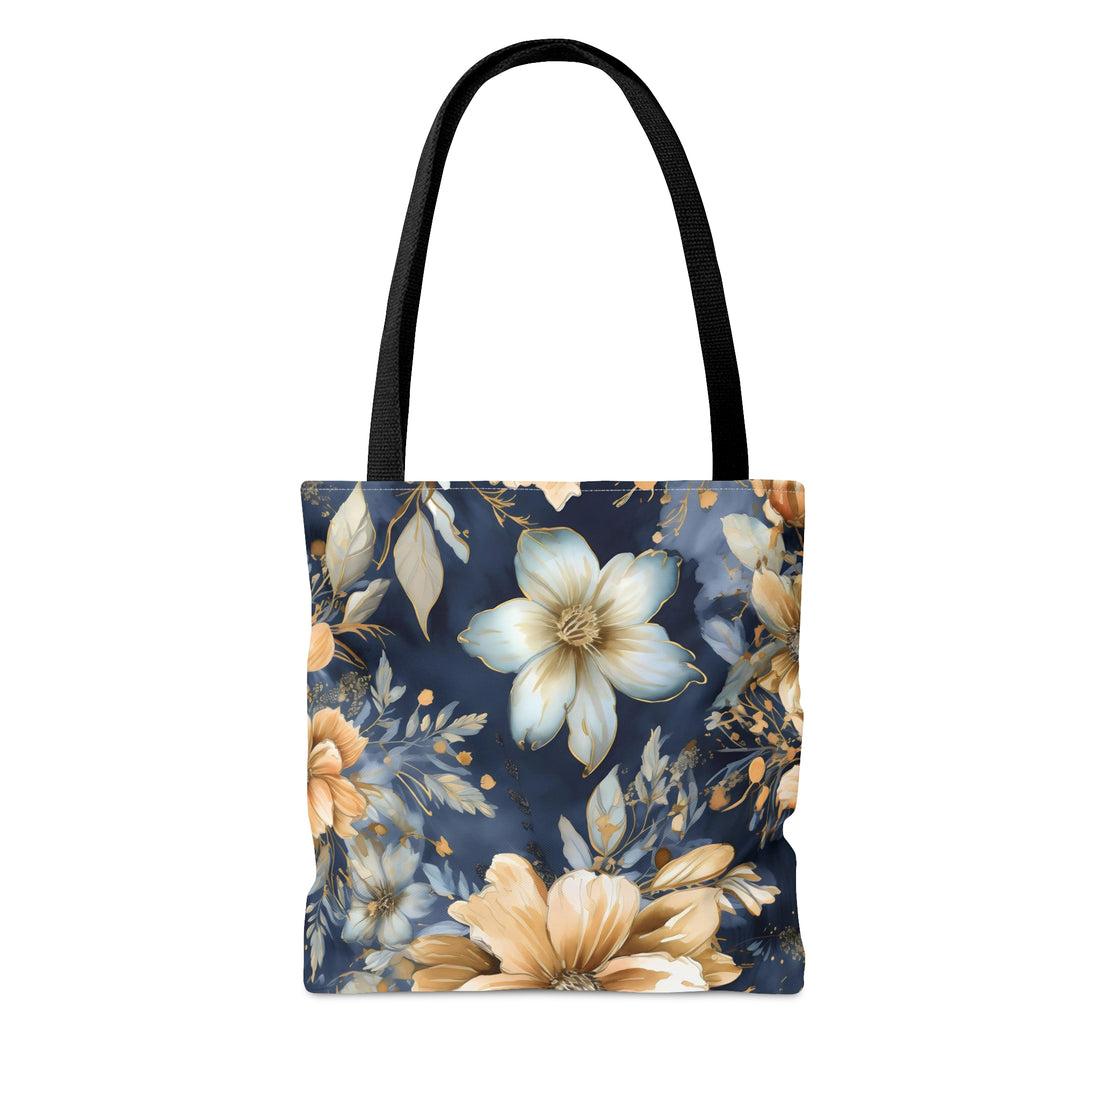 Blue and Beige Floral Tote Bag